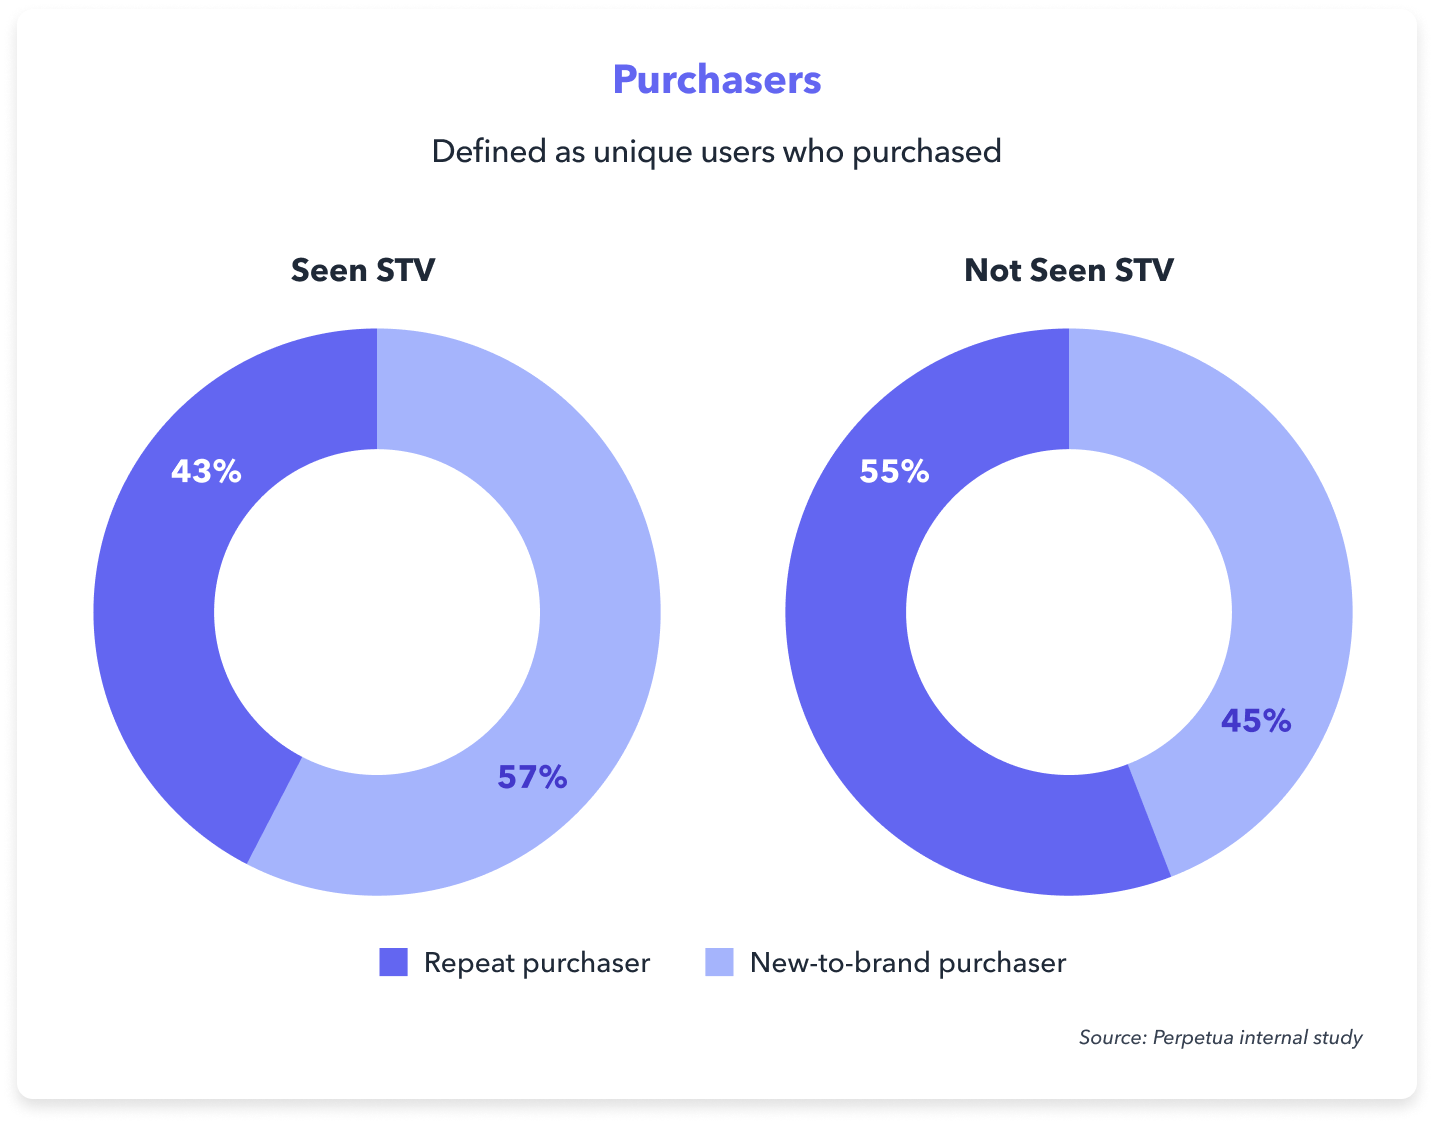 Customers who have seen an Amazon DSP STV ad are more likely to be new to brand than those who have not